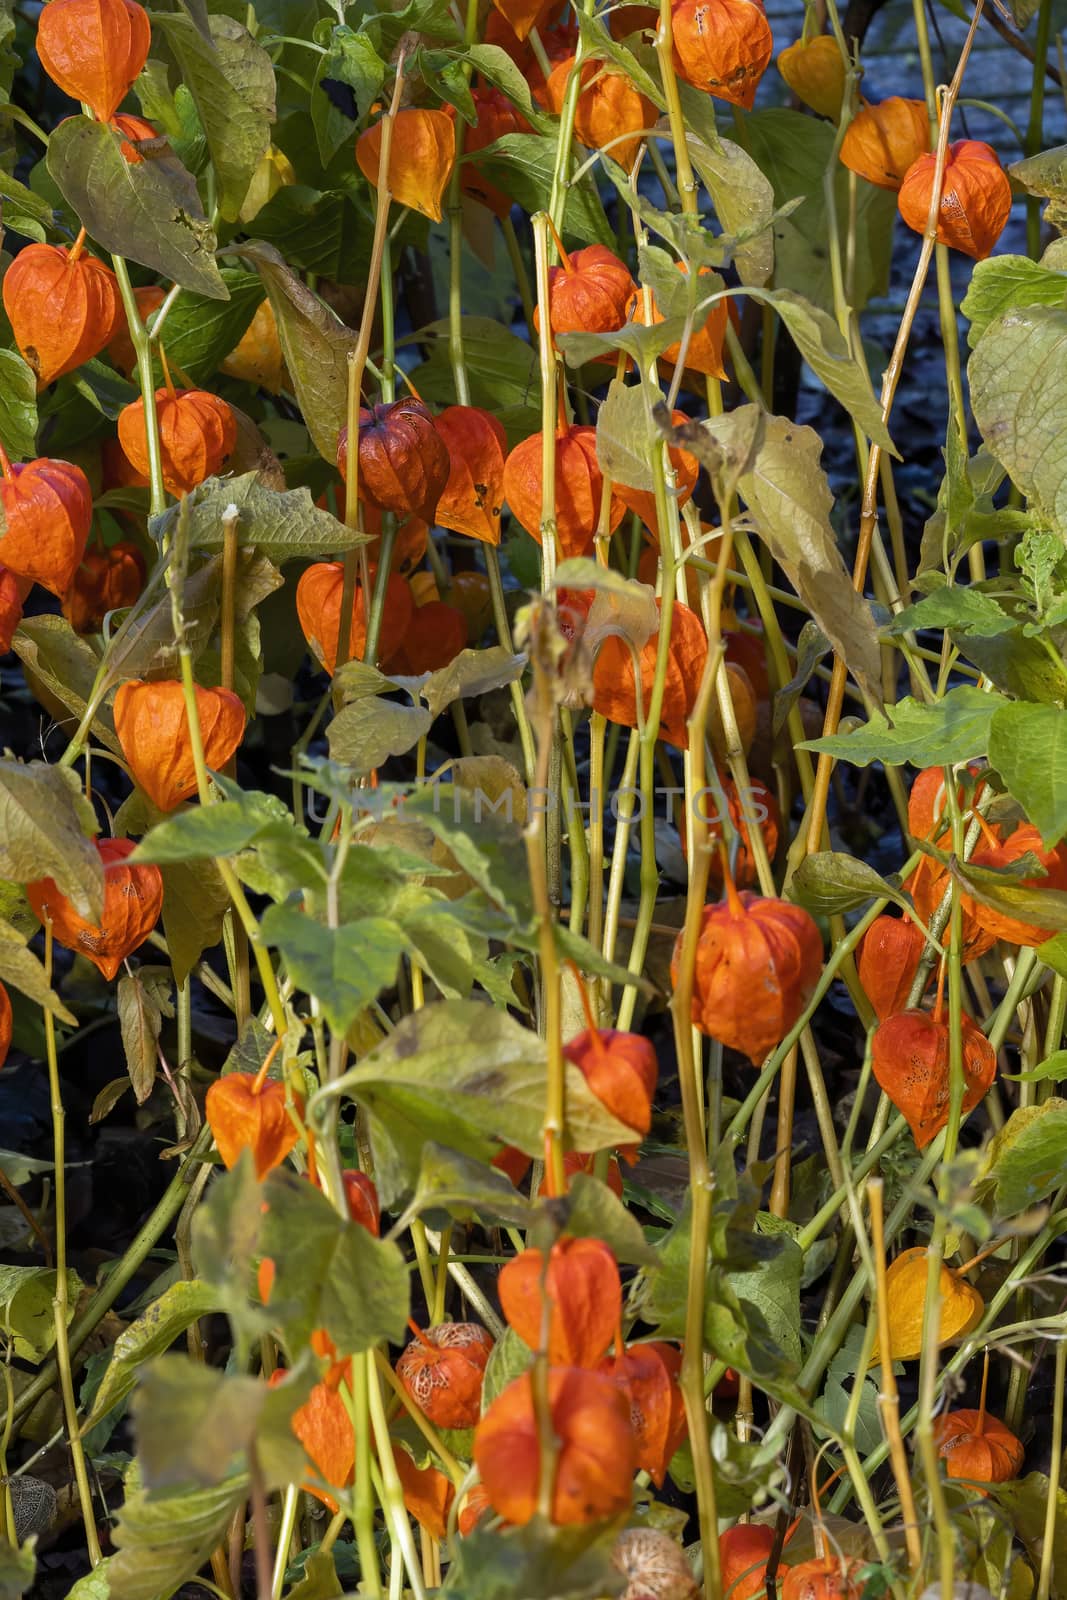 Physalis alkekengi var. franchetii 'Zwerg' commonly known as Chi by ant